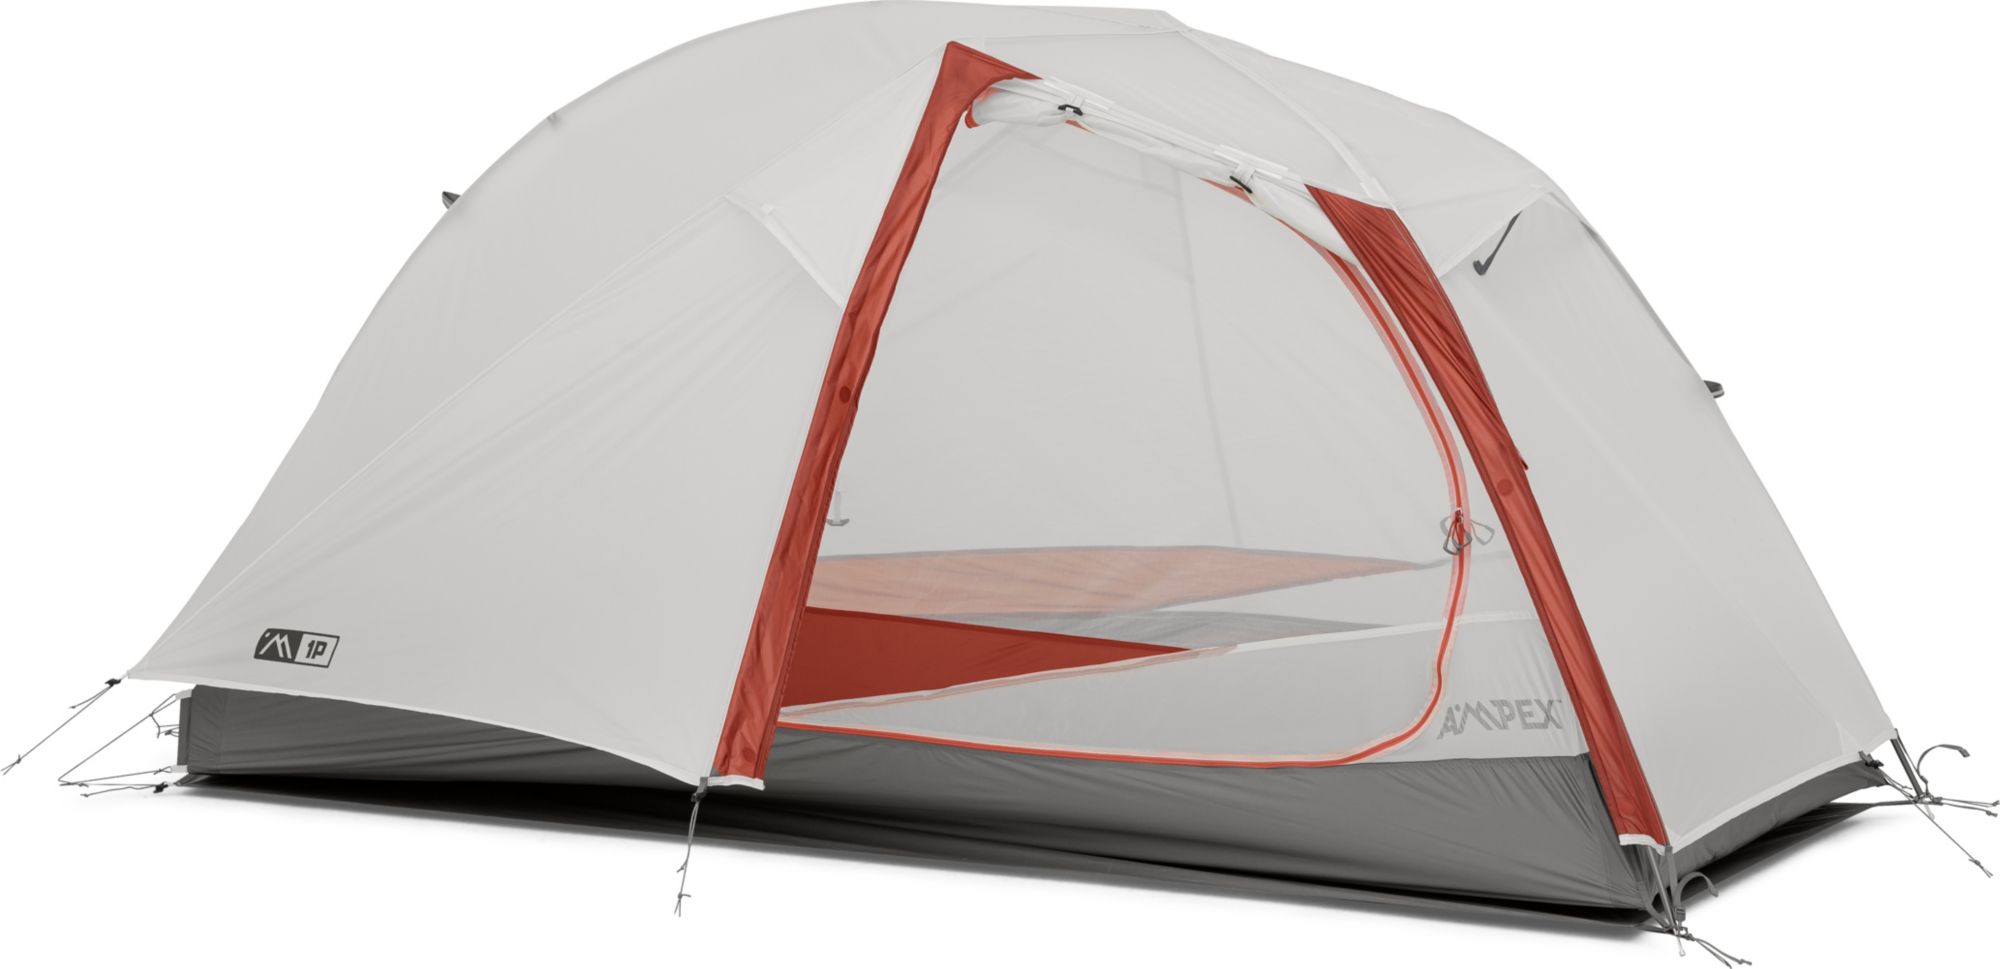 Photos - Tent AMPEX Codazzi 1 Person Backpacking , White/Red/Grey 23RDWU1PBCKPCKNGTC